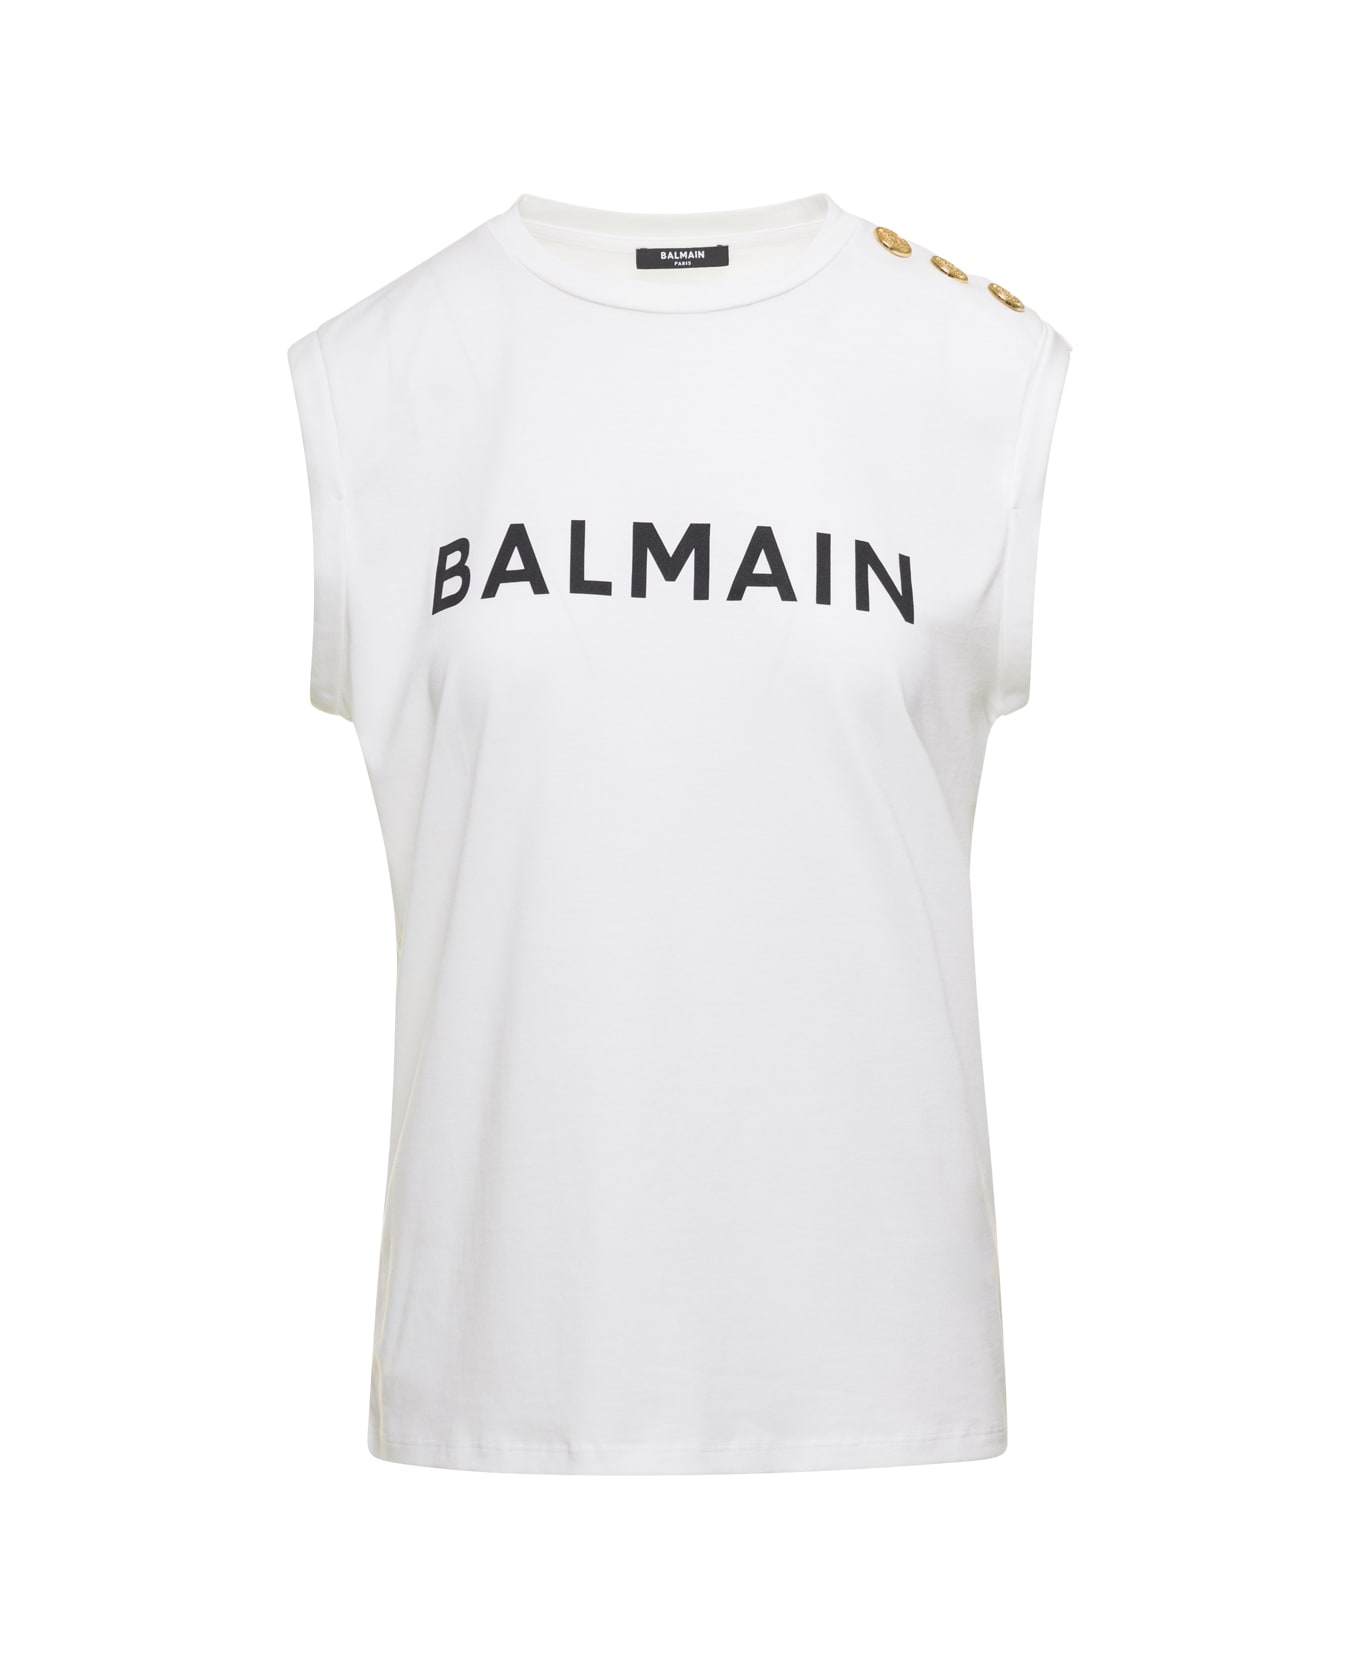 Balmain White Tank Top With Contrasting Lettering Print And Jewel Buttons In Cotton Donna Balmain - White